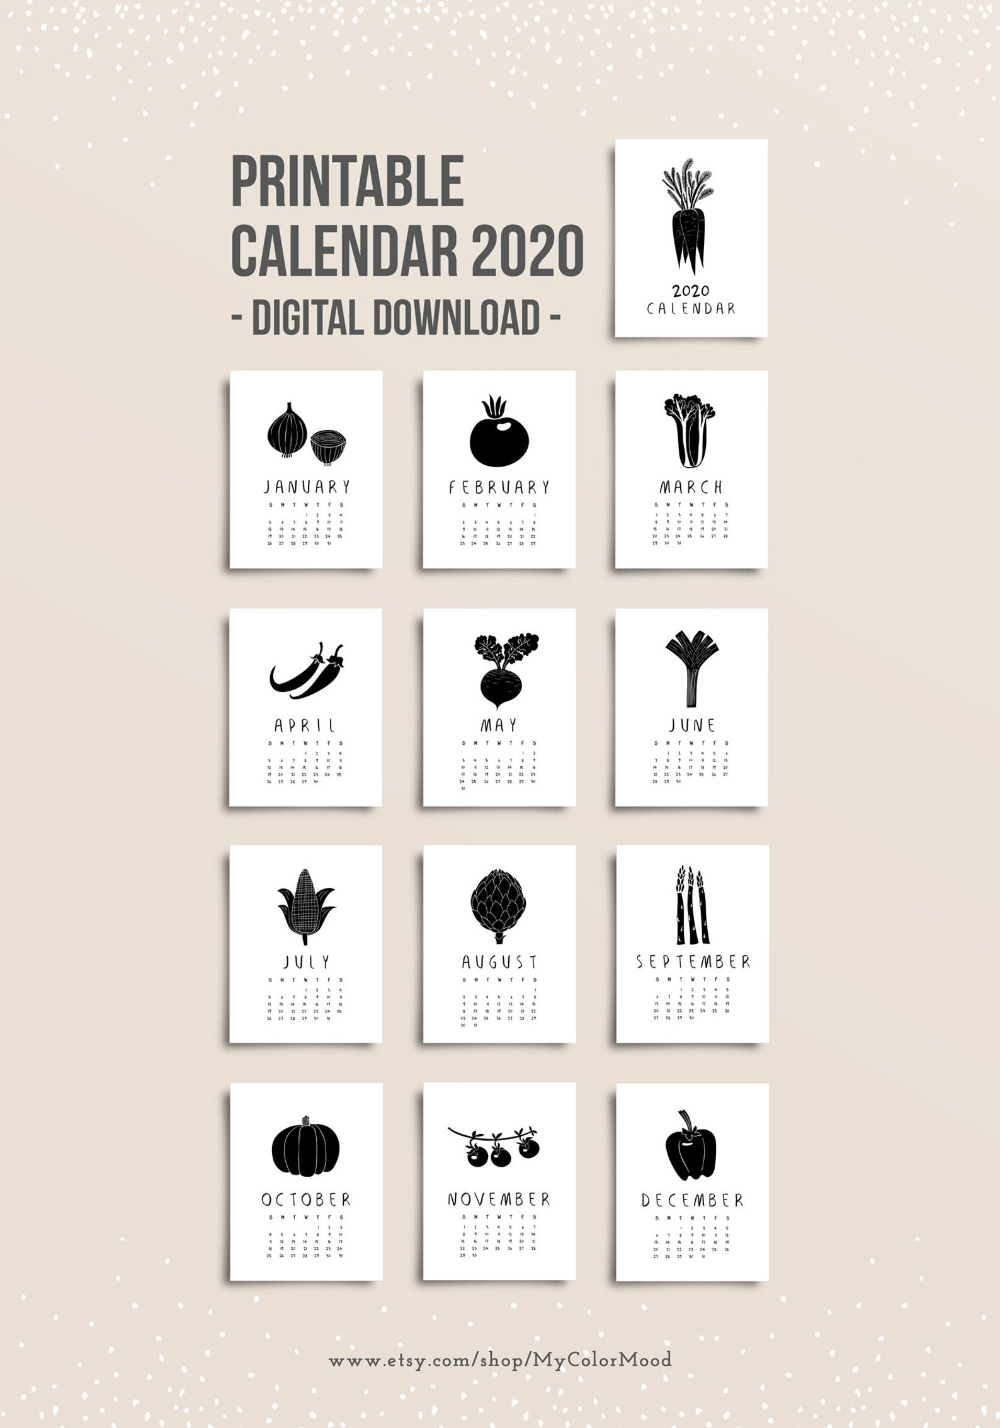 Monthly Calendar 2020, Printable Kitchen Calendar Pages